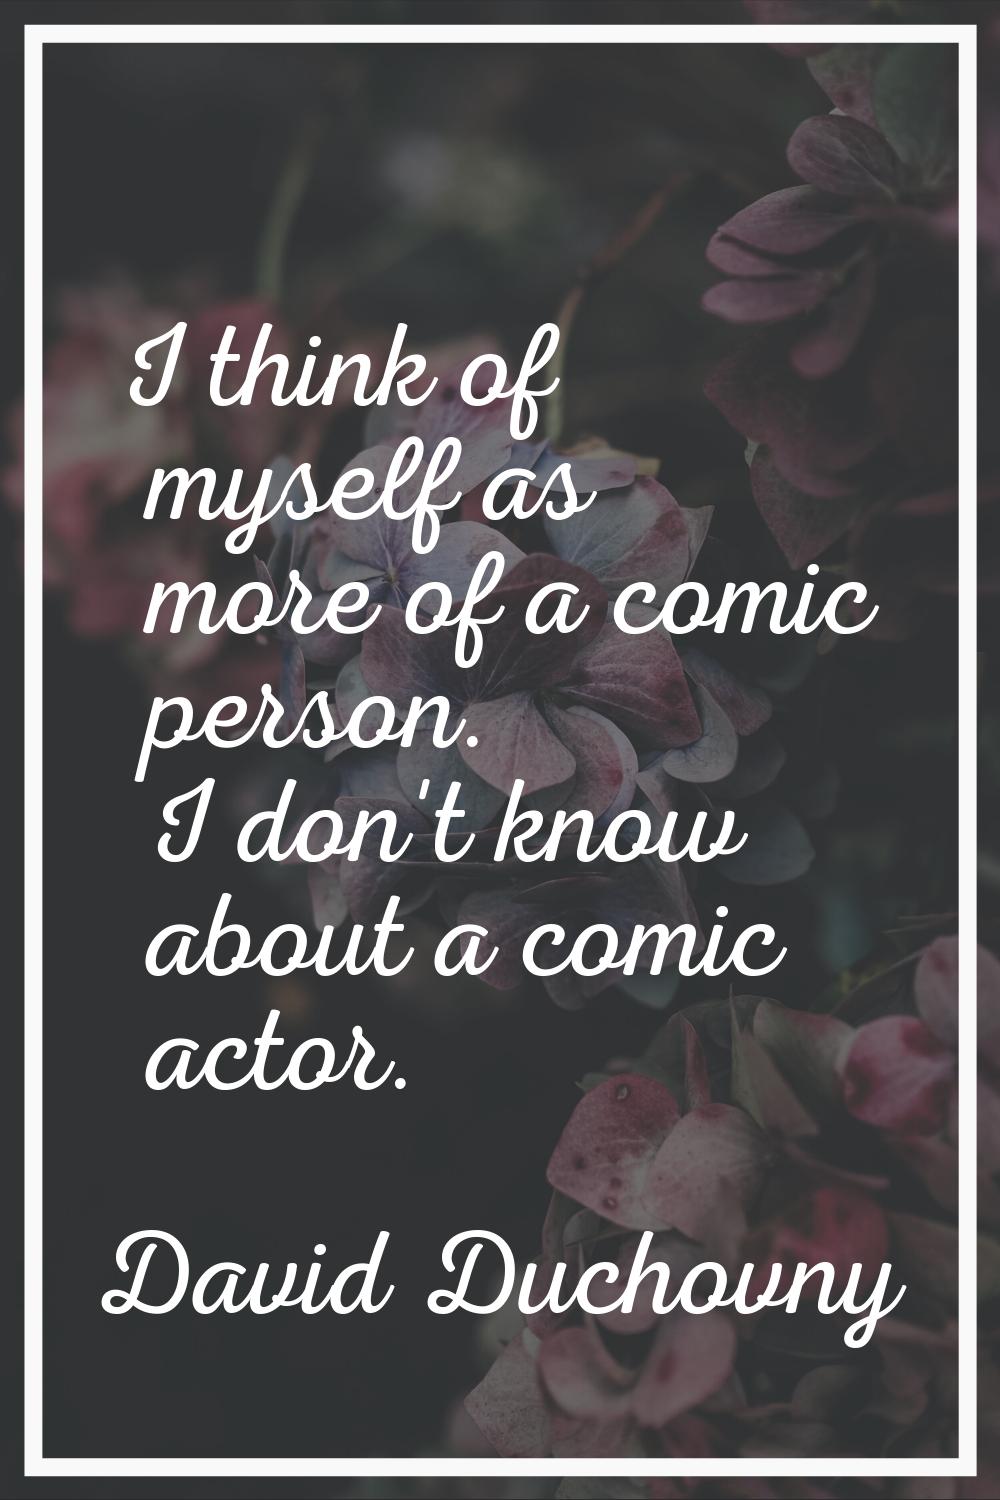 I think of myself as more of a comic person. I don't know about a comic actor.